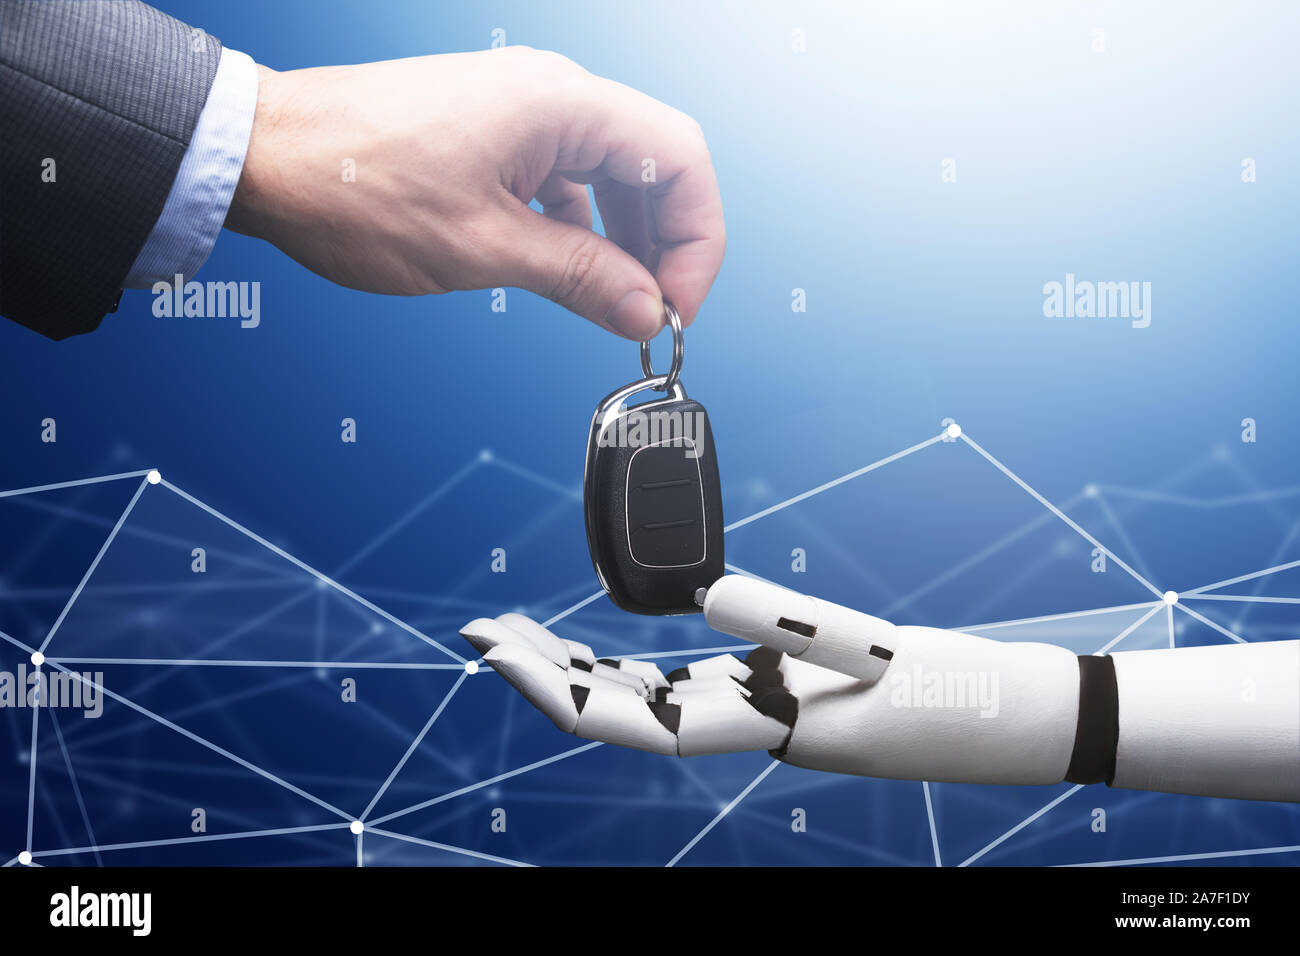 Close-up Of A Businessperson's Hand Giving Car Key To Robot On Blue Technology Background Stock Photo